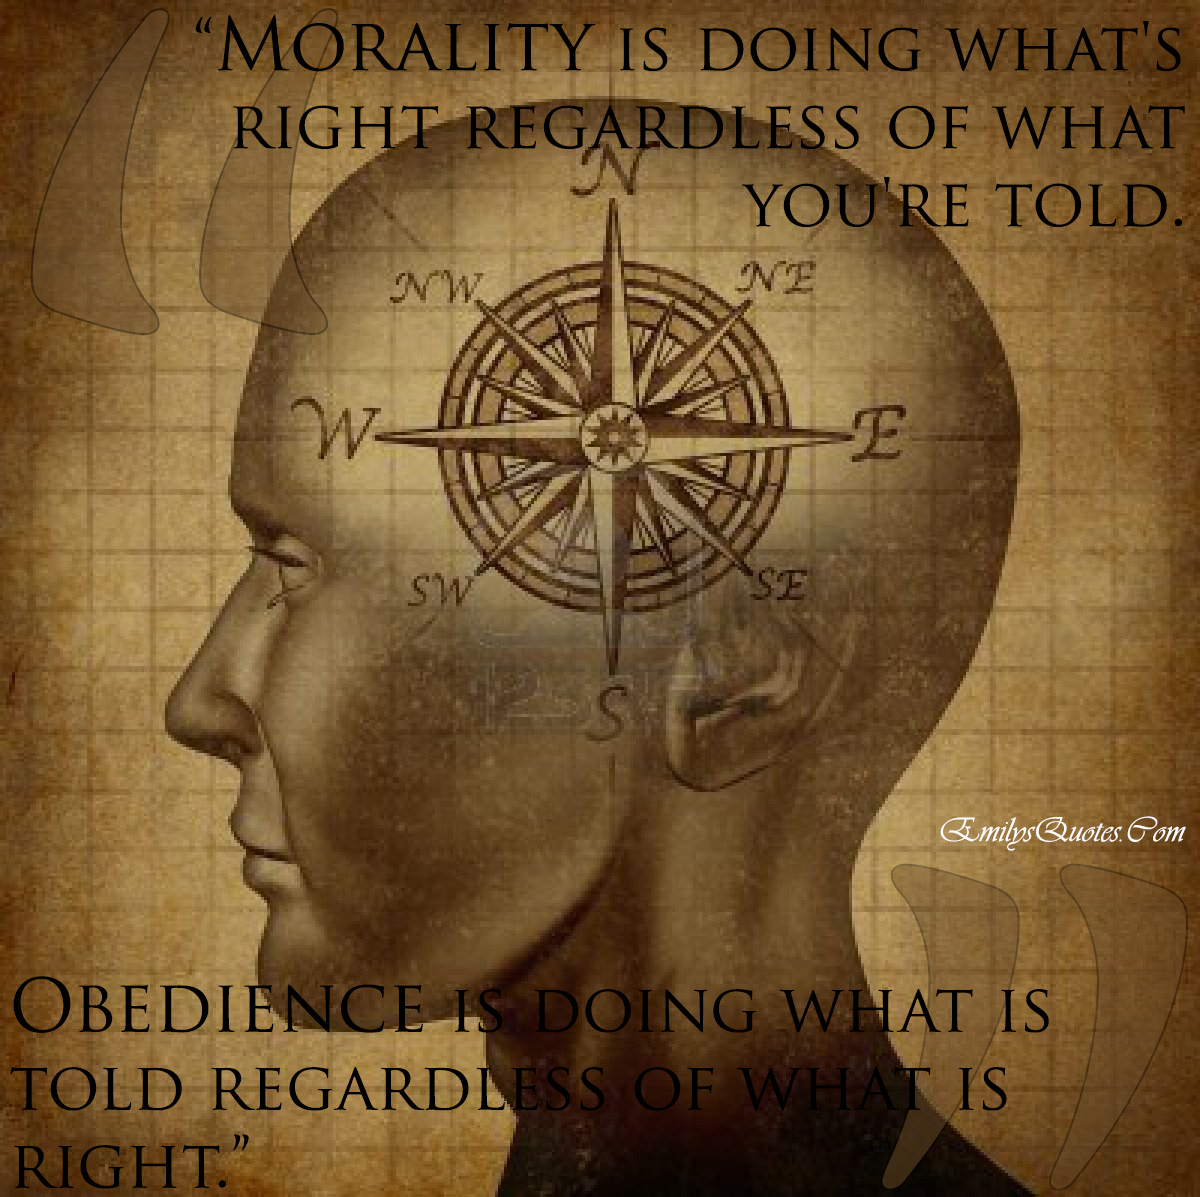 Morality is doing what’s right regardless of what you’re told. Obedience is doing what is told regardless of what is right